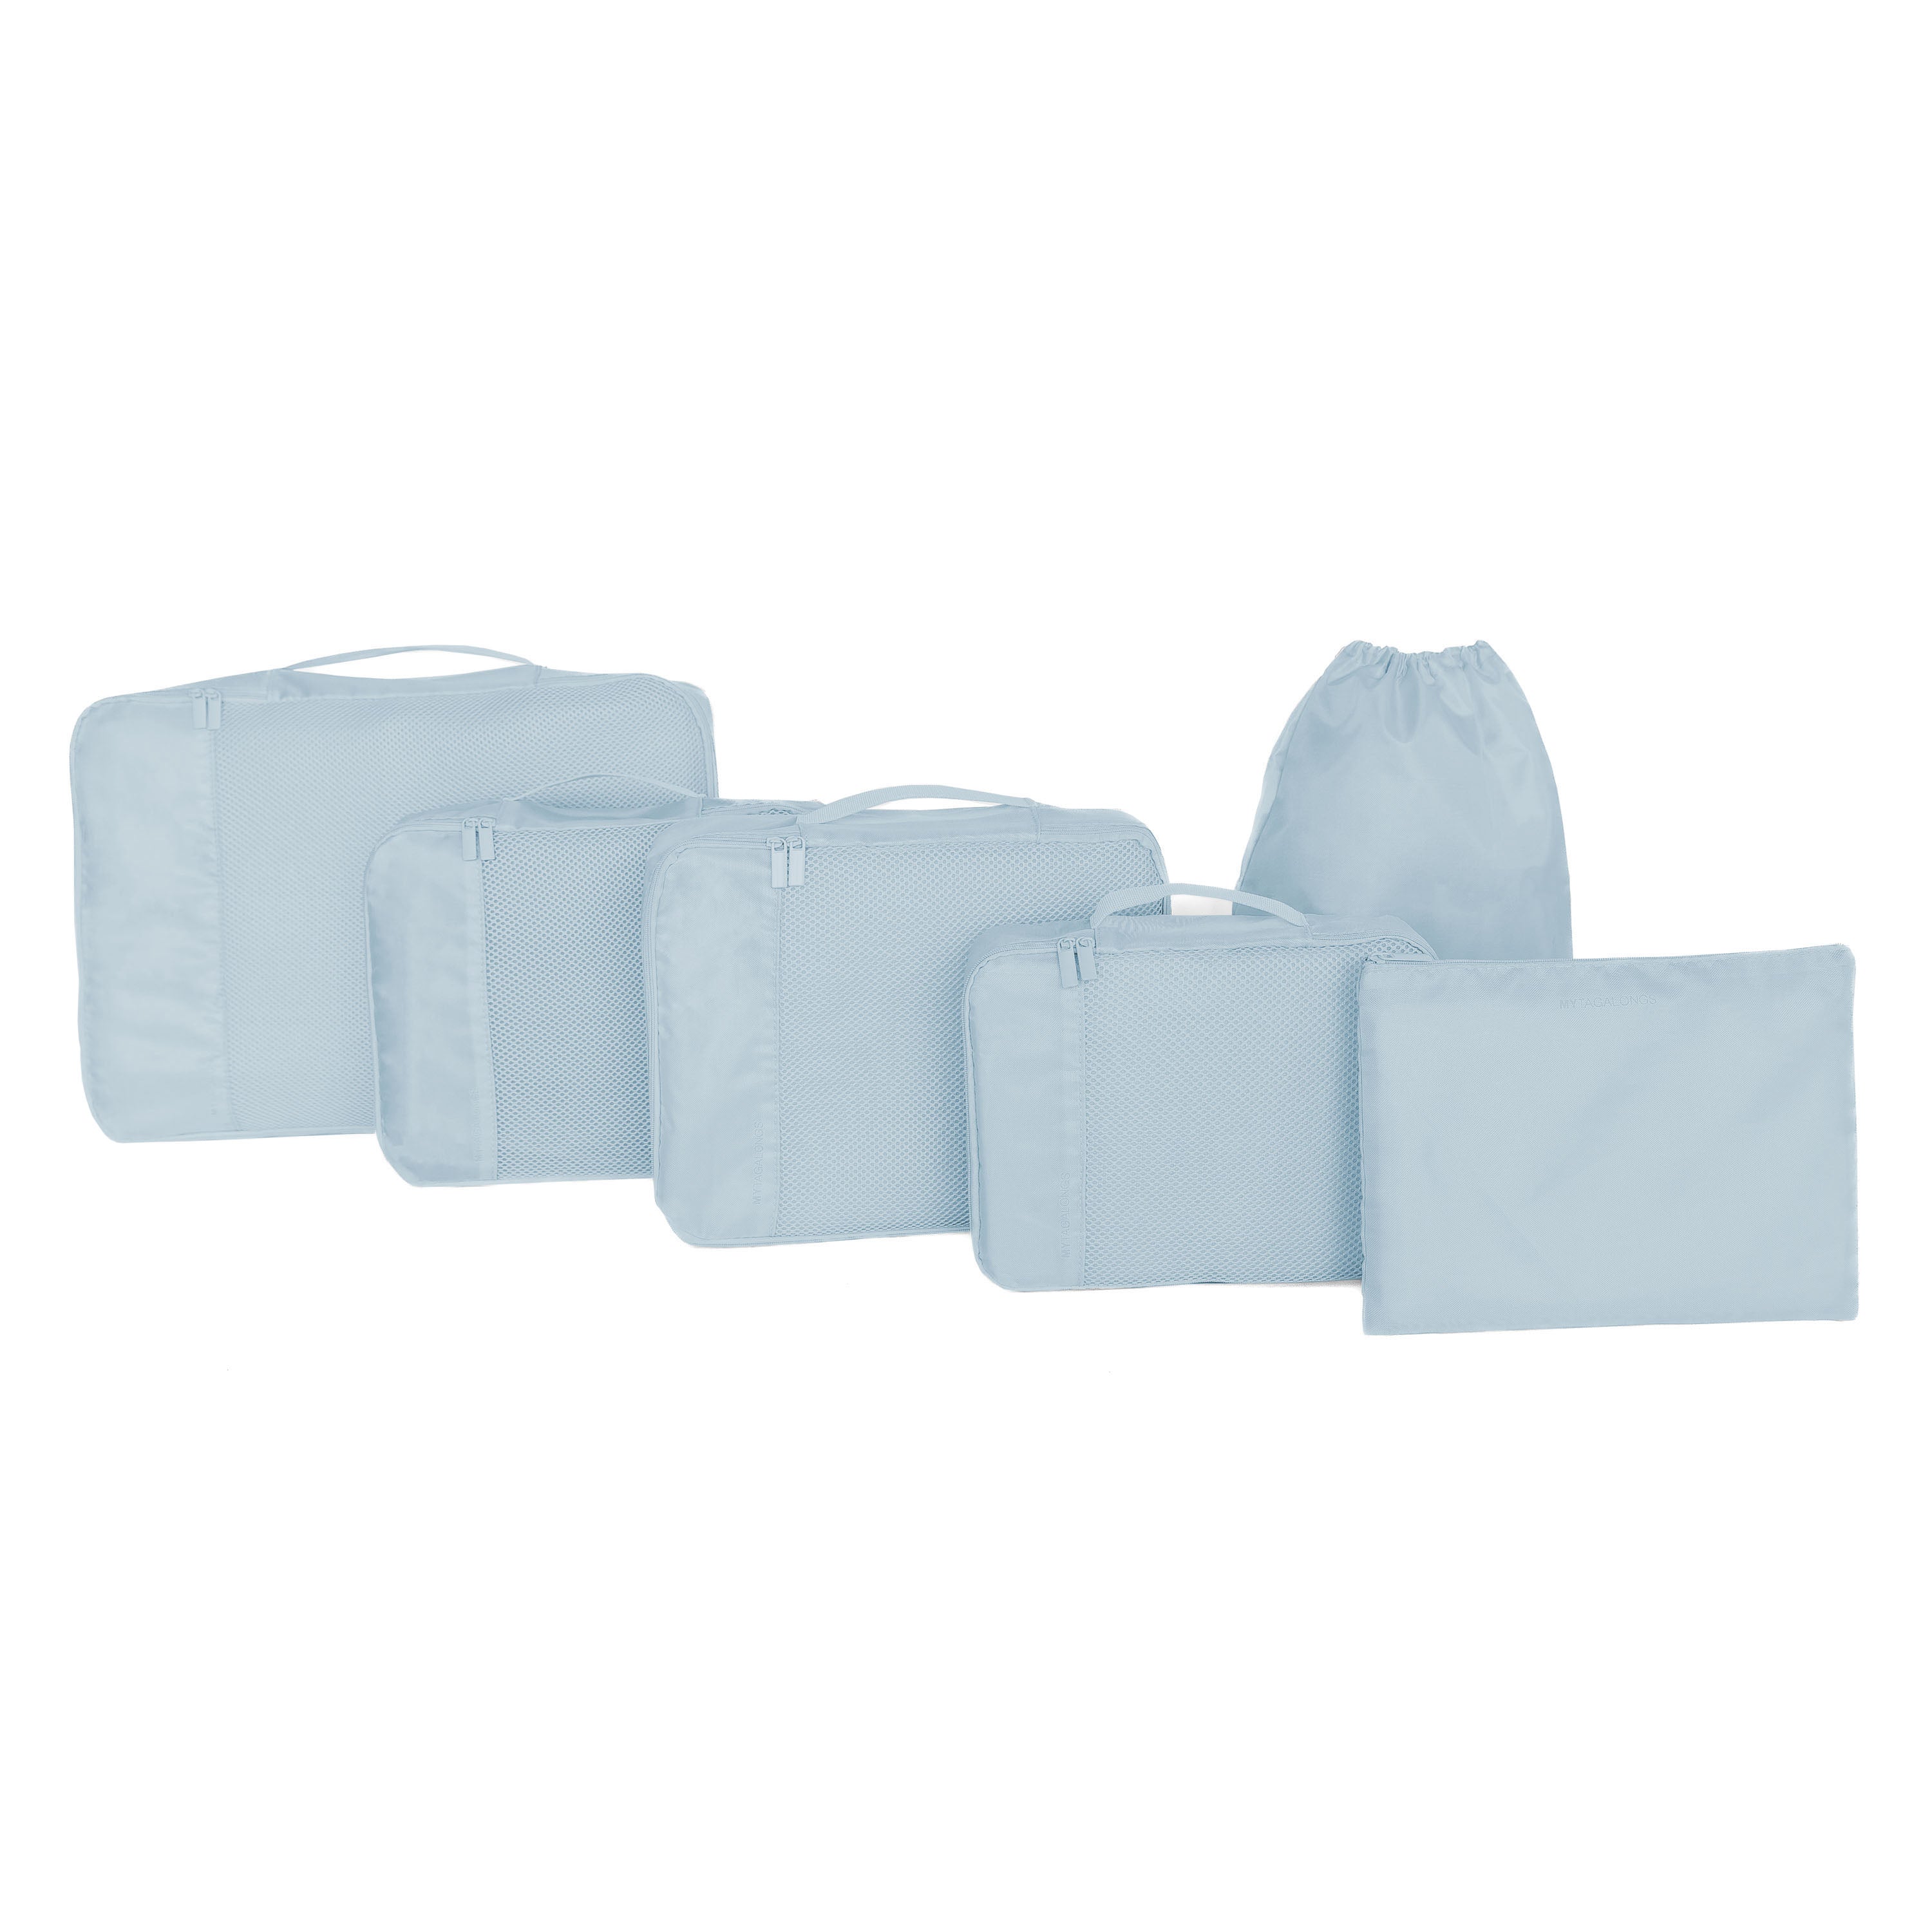 BLUE SET OF 6 PACKING PODS